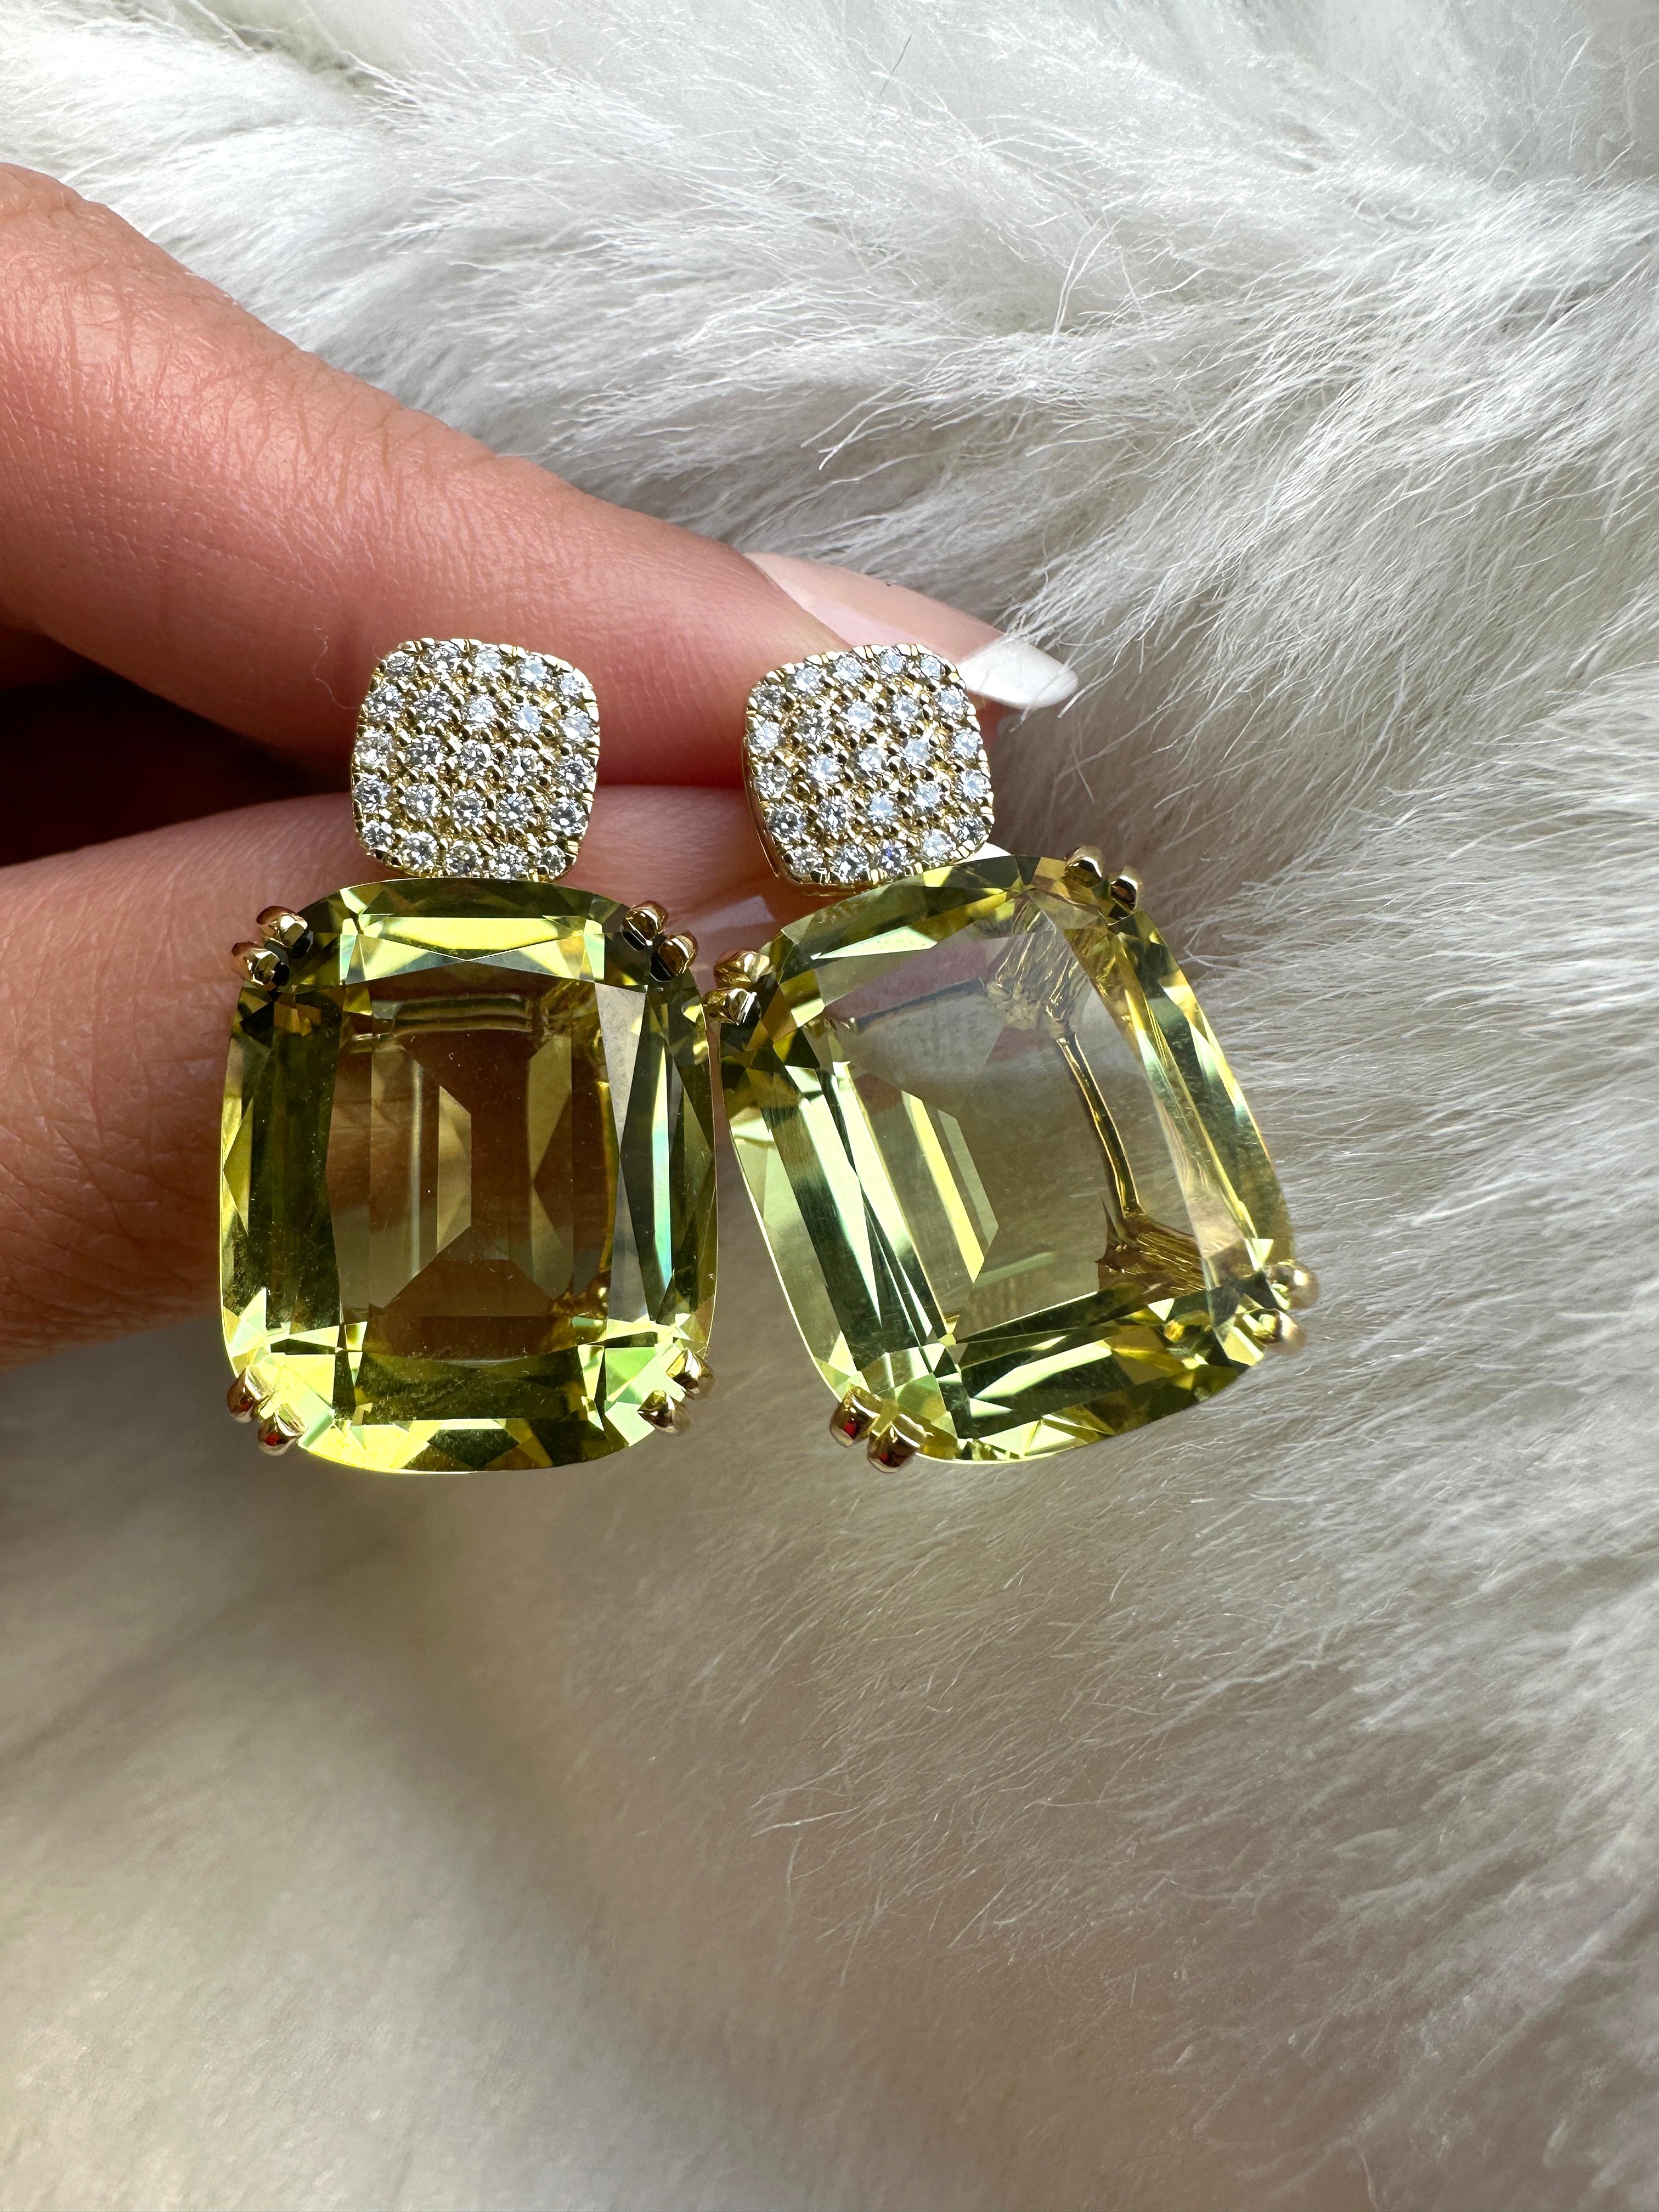 Introducing the stunning Lemon Quartz Cushion & Diamonds Earrings from our popular 'Gossip' Collection. 
The focal point of these earrings is the mesmerizing lemon quartz cushion-cut gemstone. The cushion-cut shape adds a touch of vintage charm,